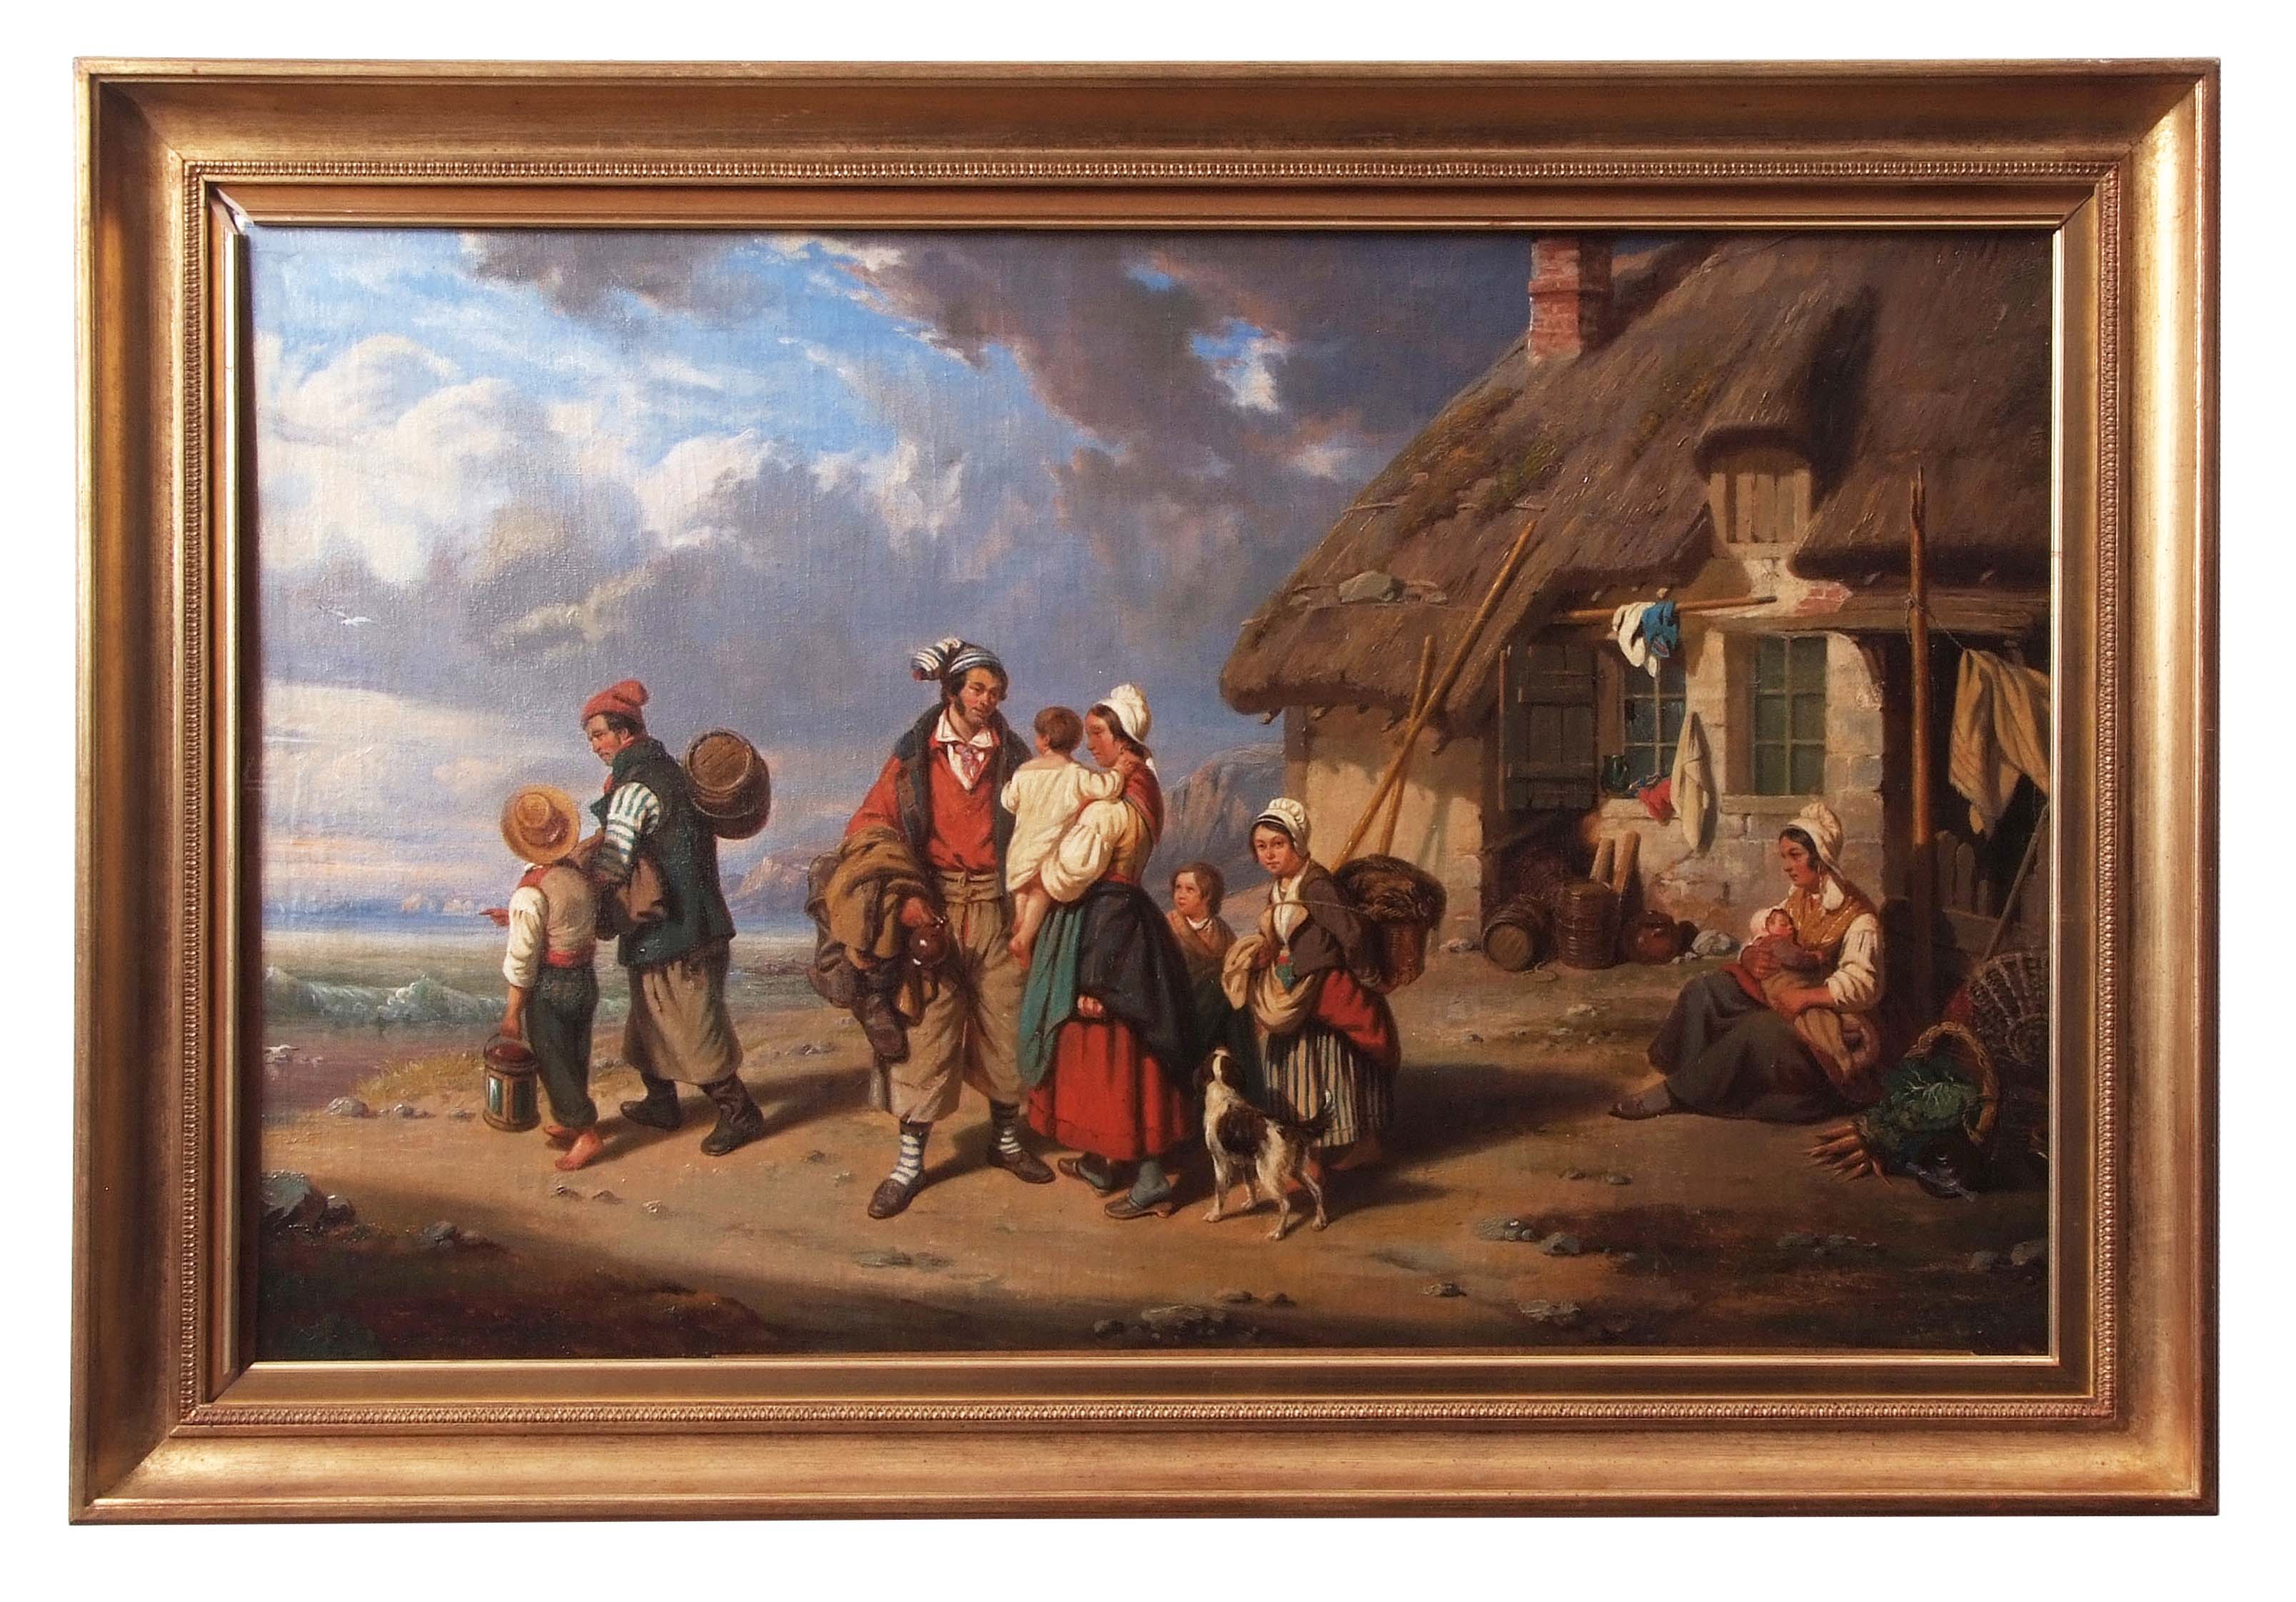 French School (19th century), Fisherfolk by a cottage, oil on canvas, 56 x 88cm